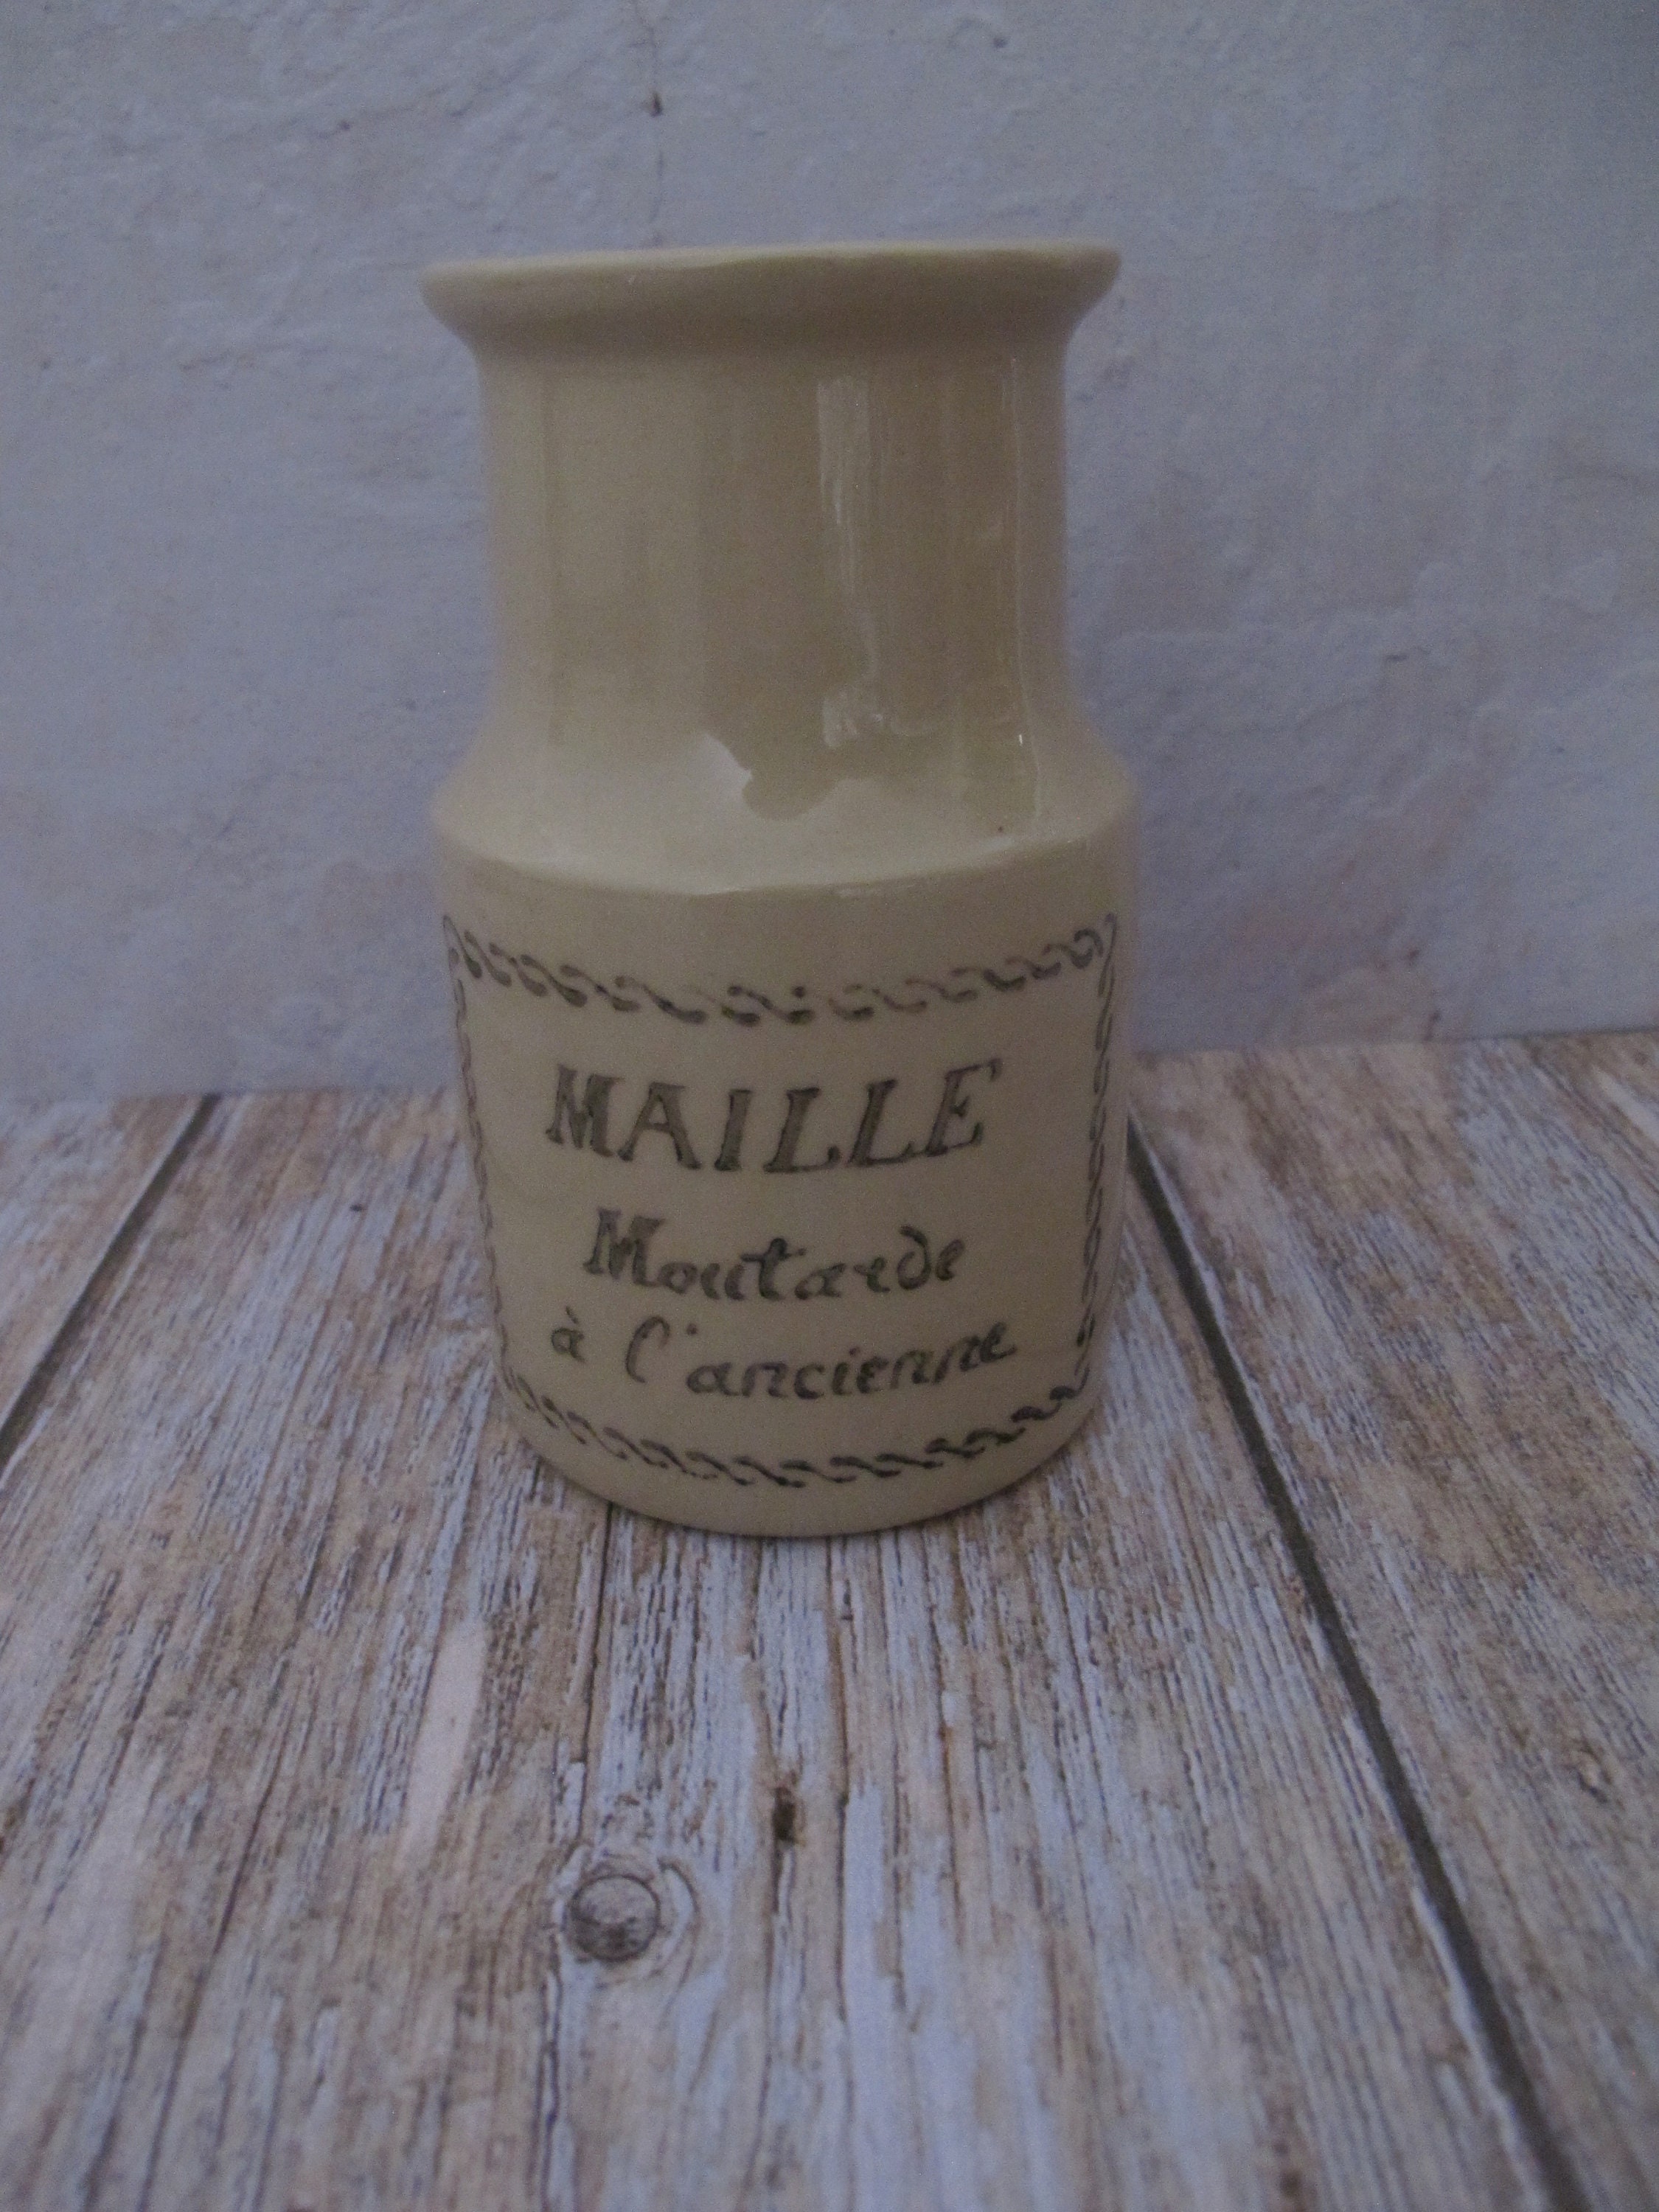 Cute French Maille Moutarde a Lancienne Dijon Mustard Pot. Grey Stone Beige  Ceramic With Muted Grey Black Writing 